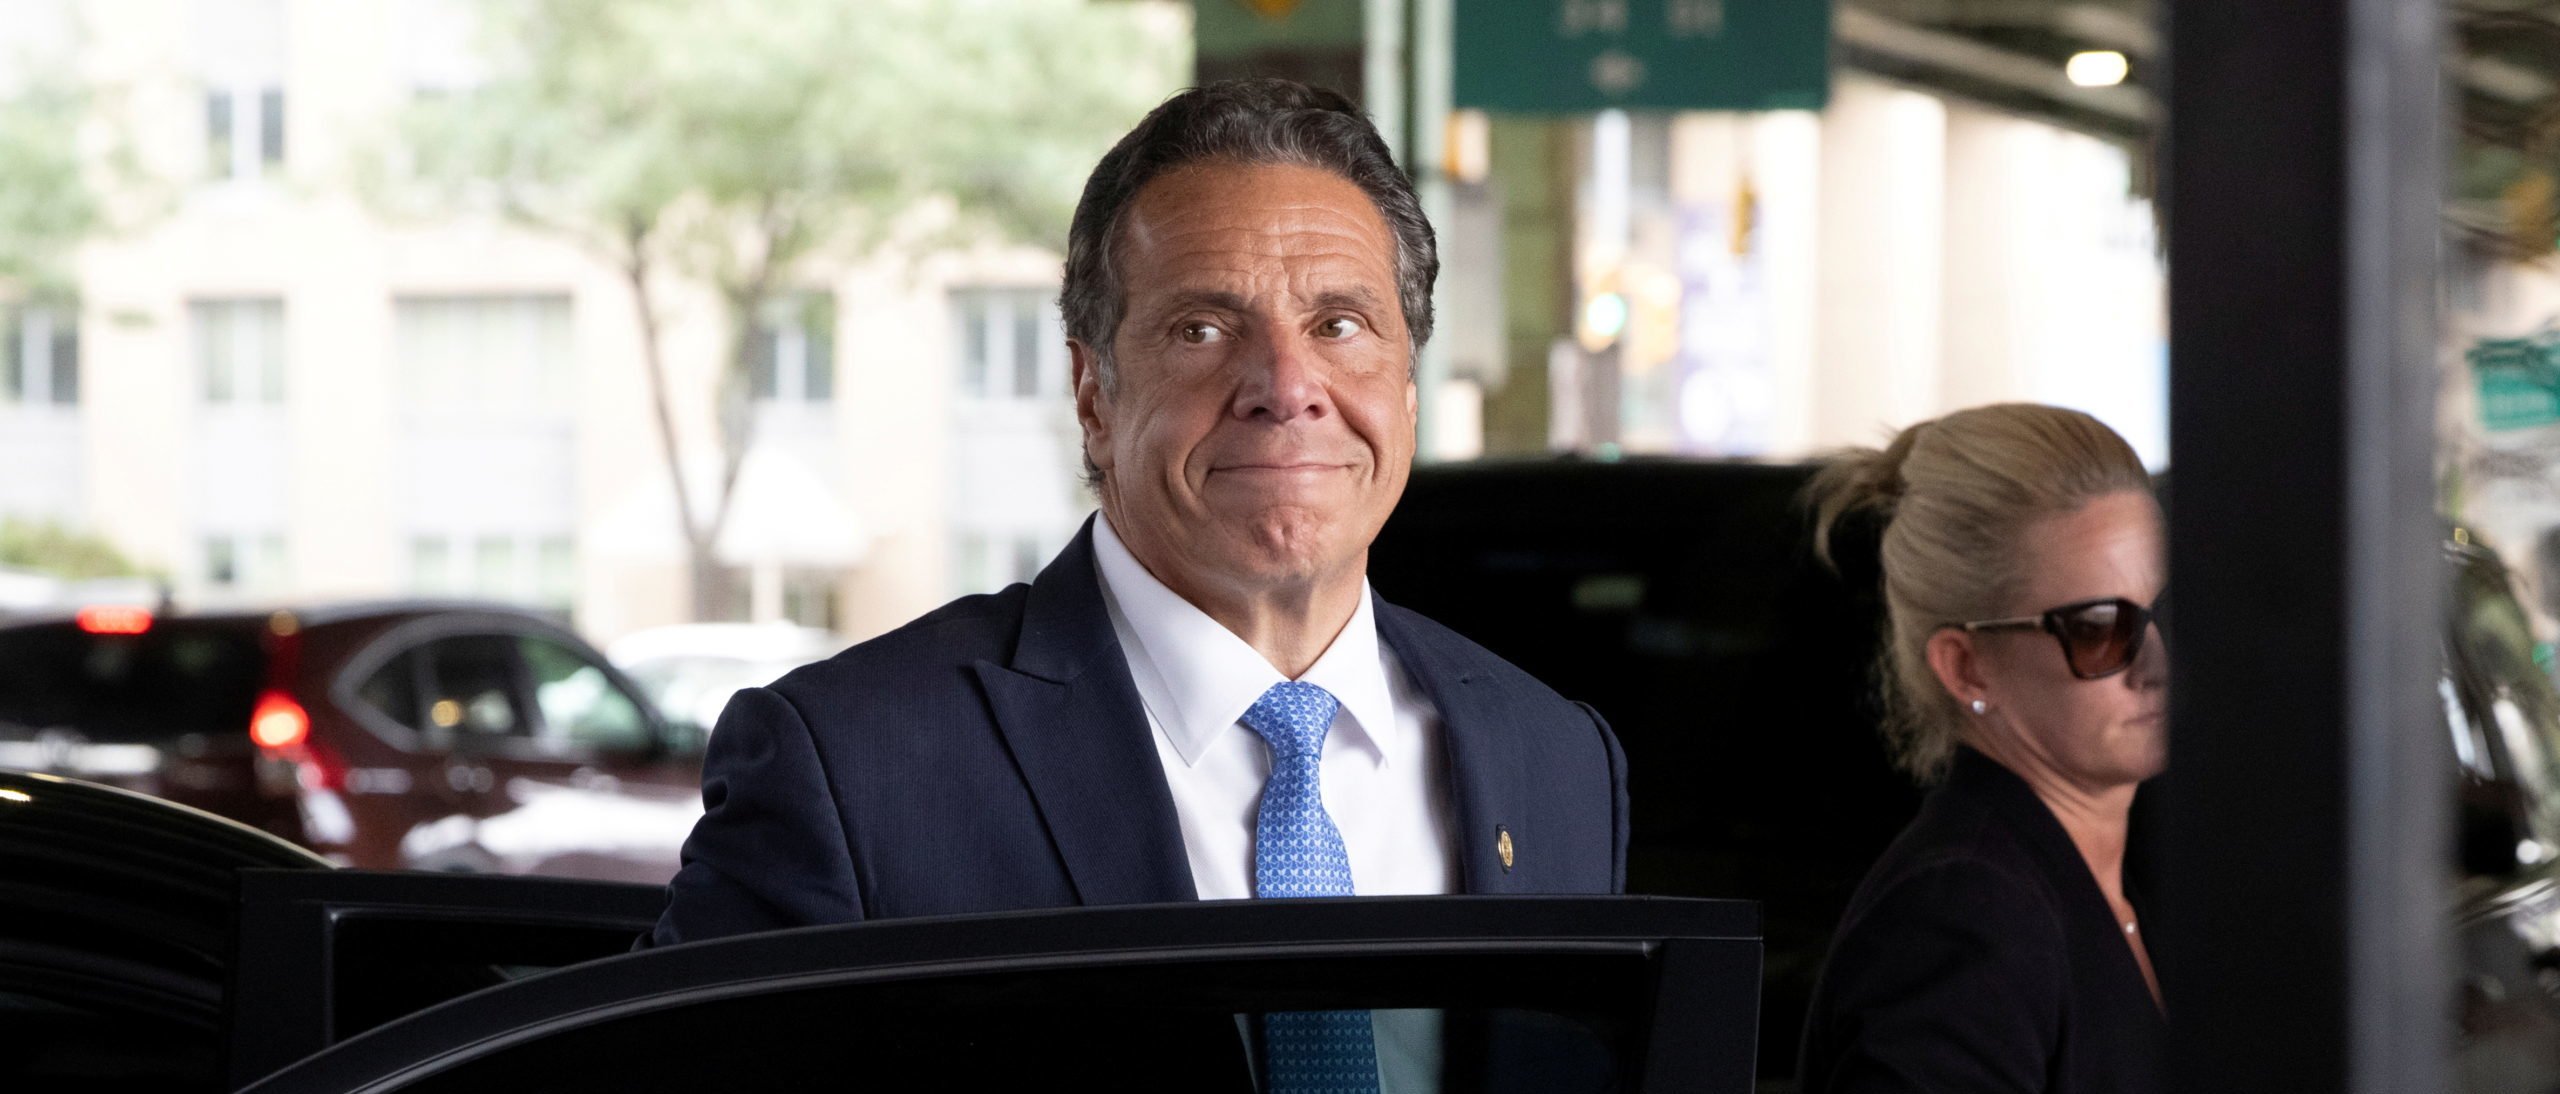 Andrew Cuomo To Testify Before Congress On COVID Nursing Home Scandal